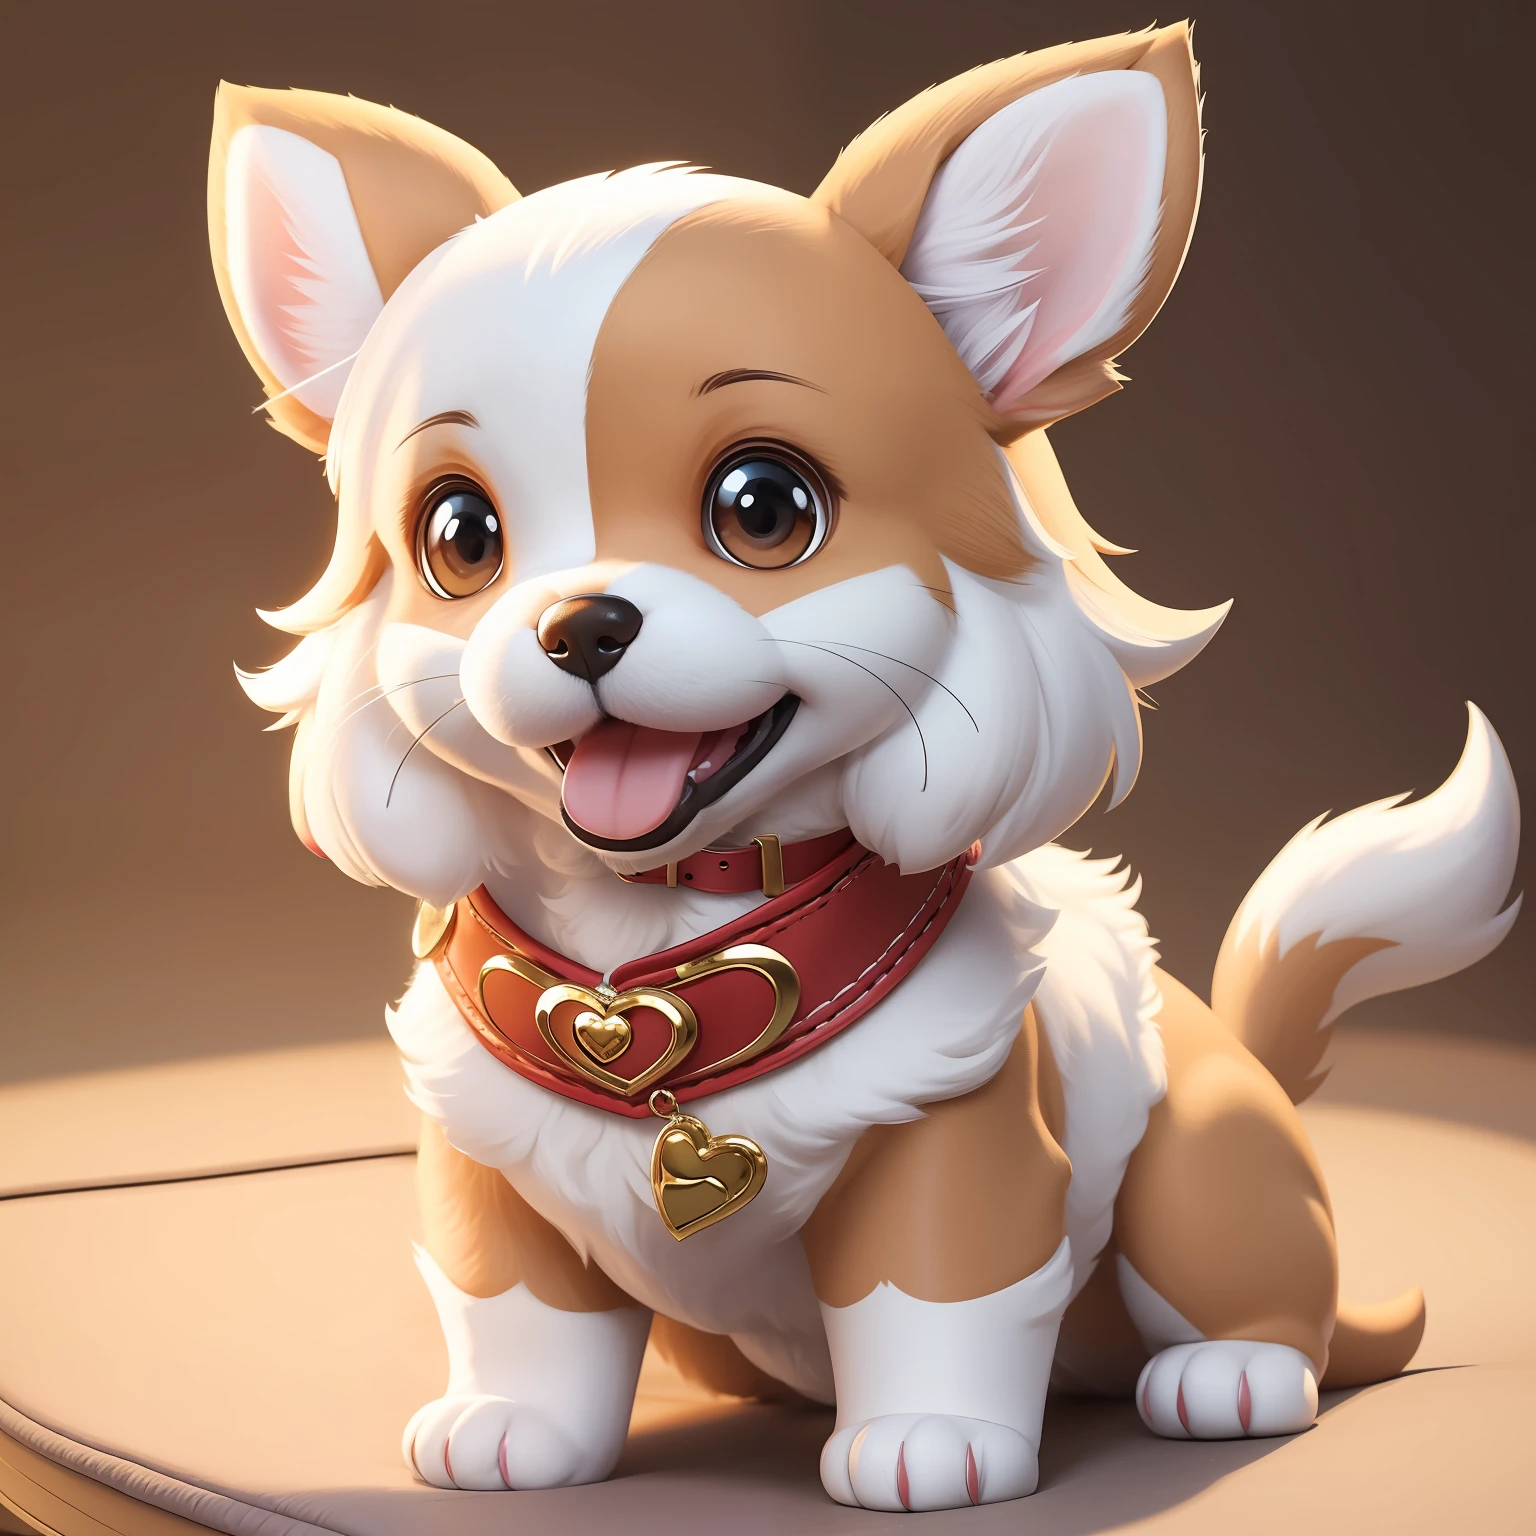 （​masterpiece）8K resolution、top-quality、Adorable dog character with cheerful smile and big ears。With collar or heart motifs、Express fidelity or affection。